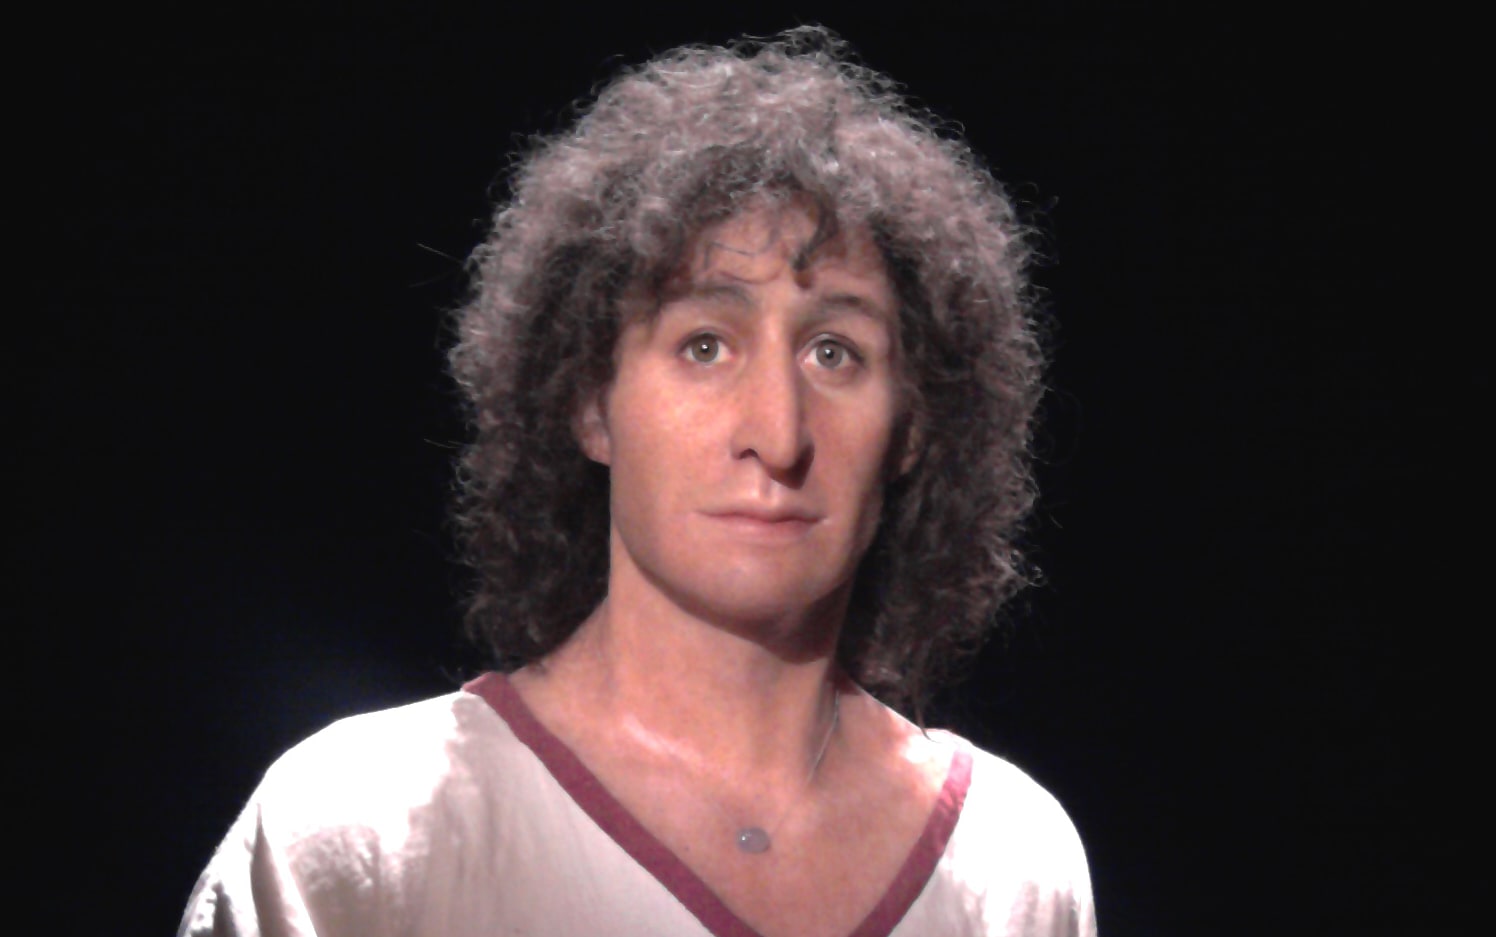 The Young Man of Byrsa - the first Phoenician to have his DNA sequenced